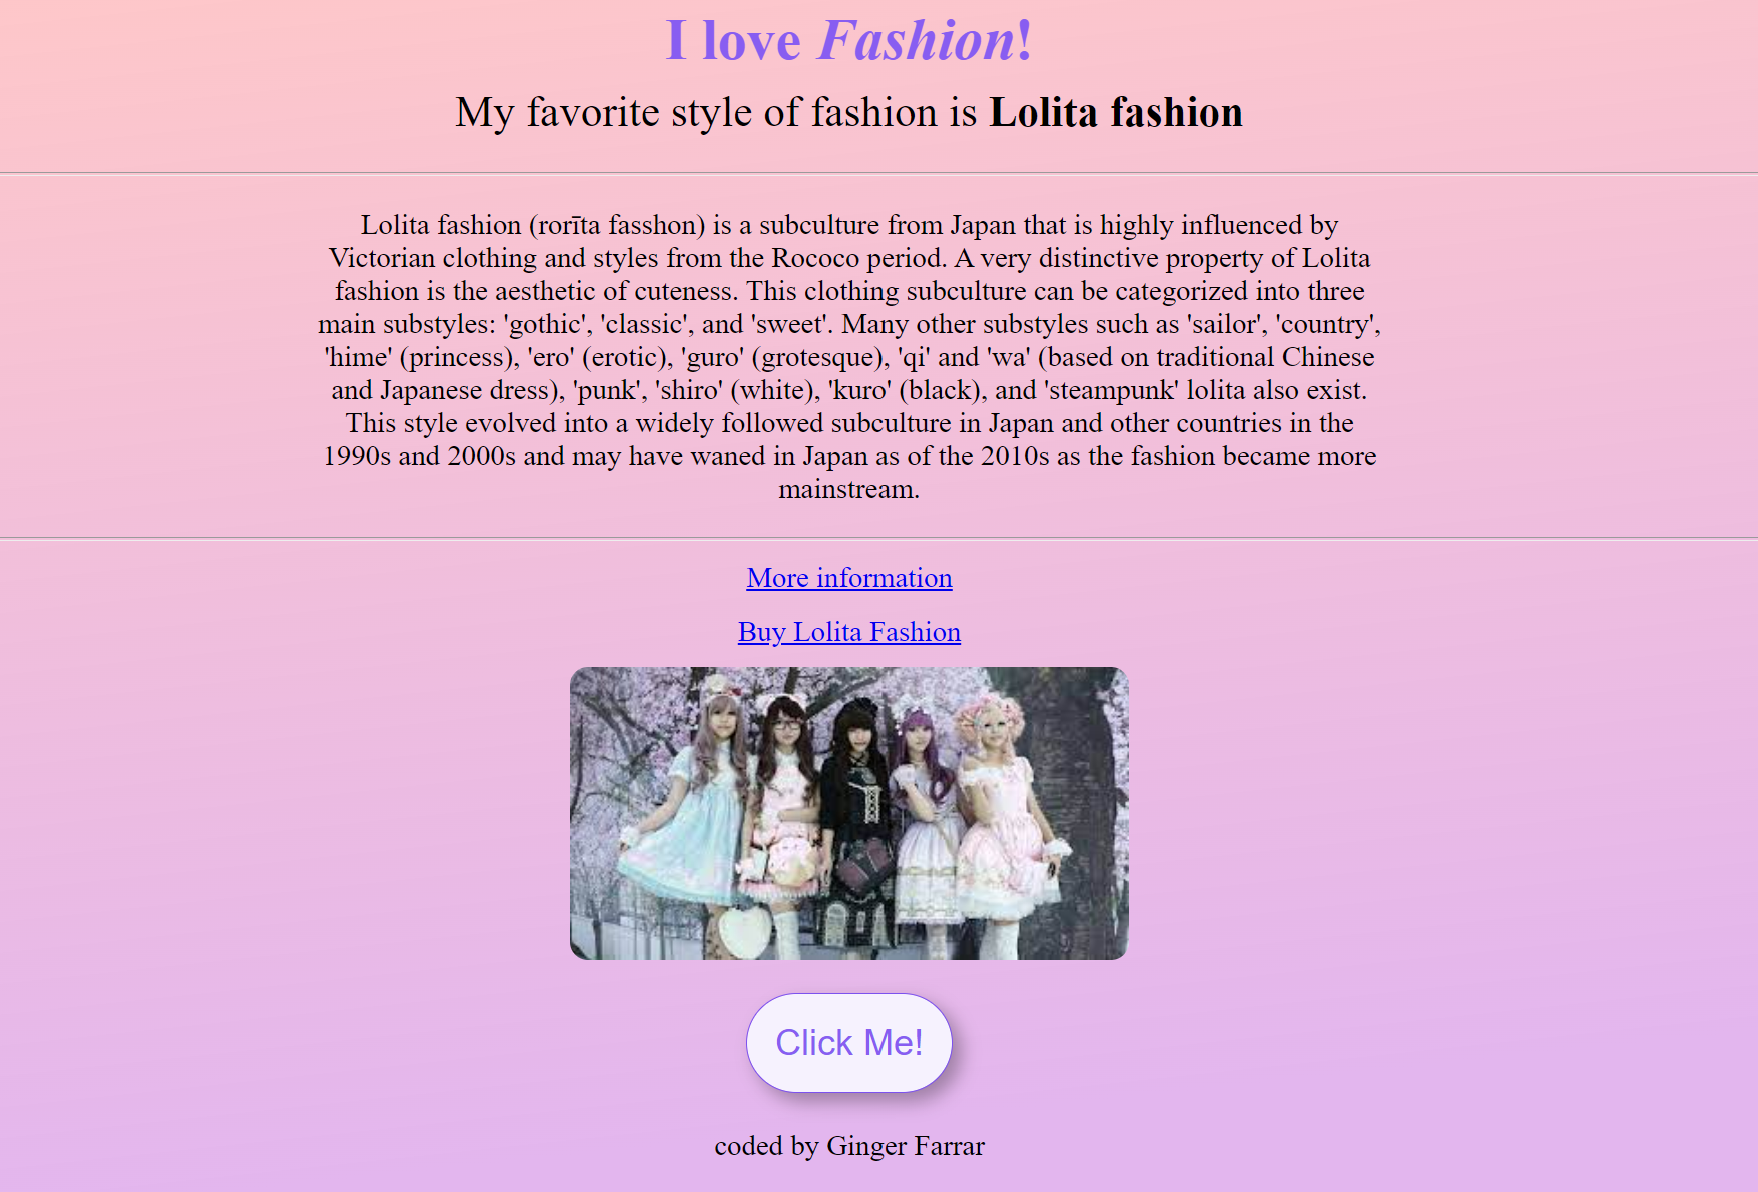 An image of a website about lolita fahsion